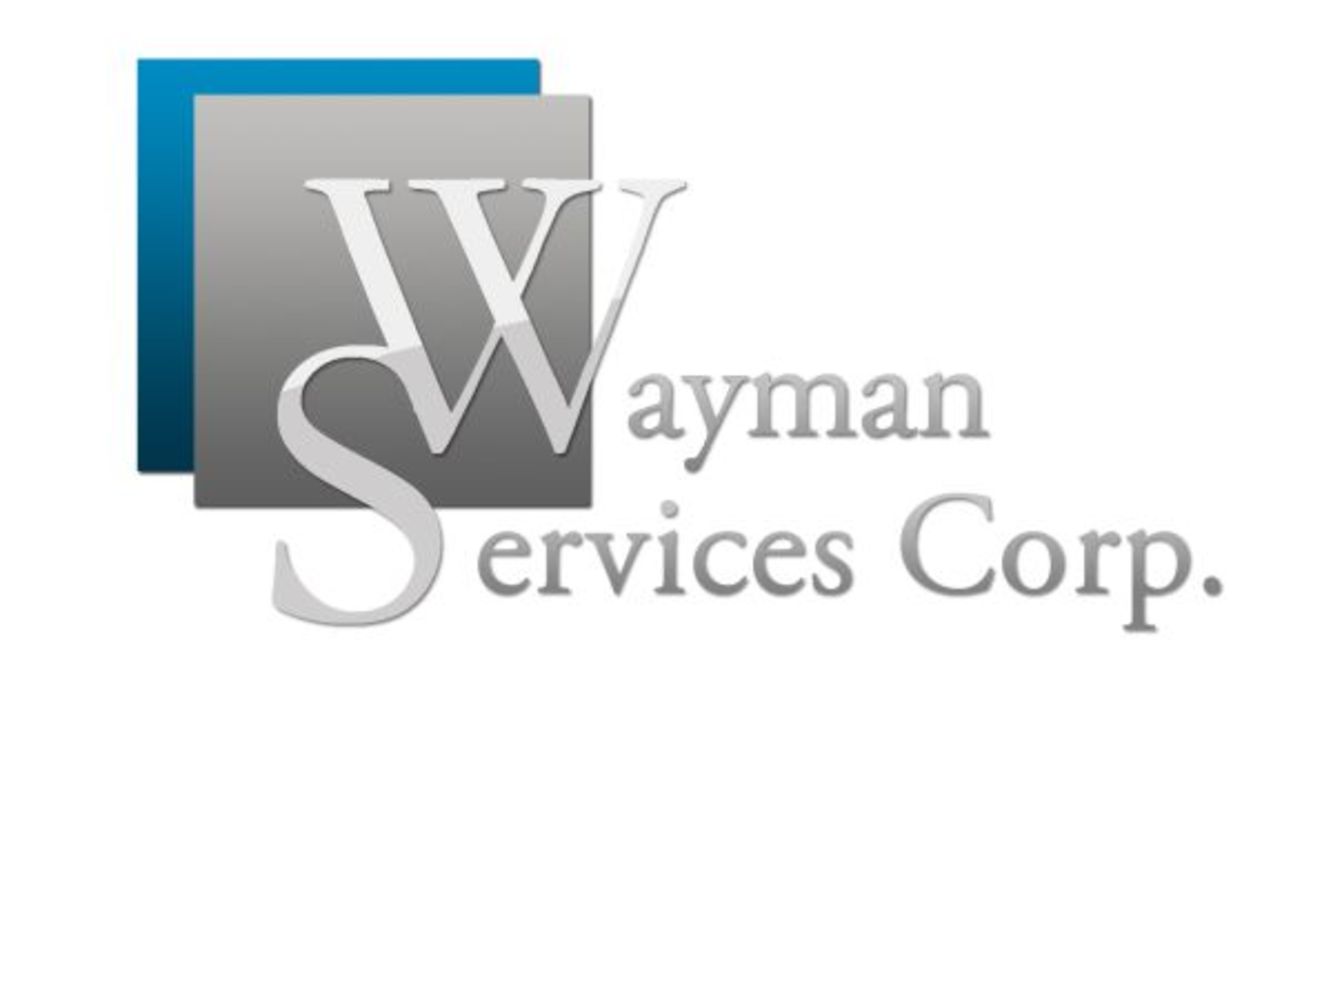 Unreserved Timed Online Bicycle Flood Insurance Claim Auction in Conjunction w/Wayman Services Corp.